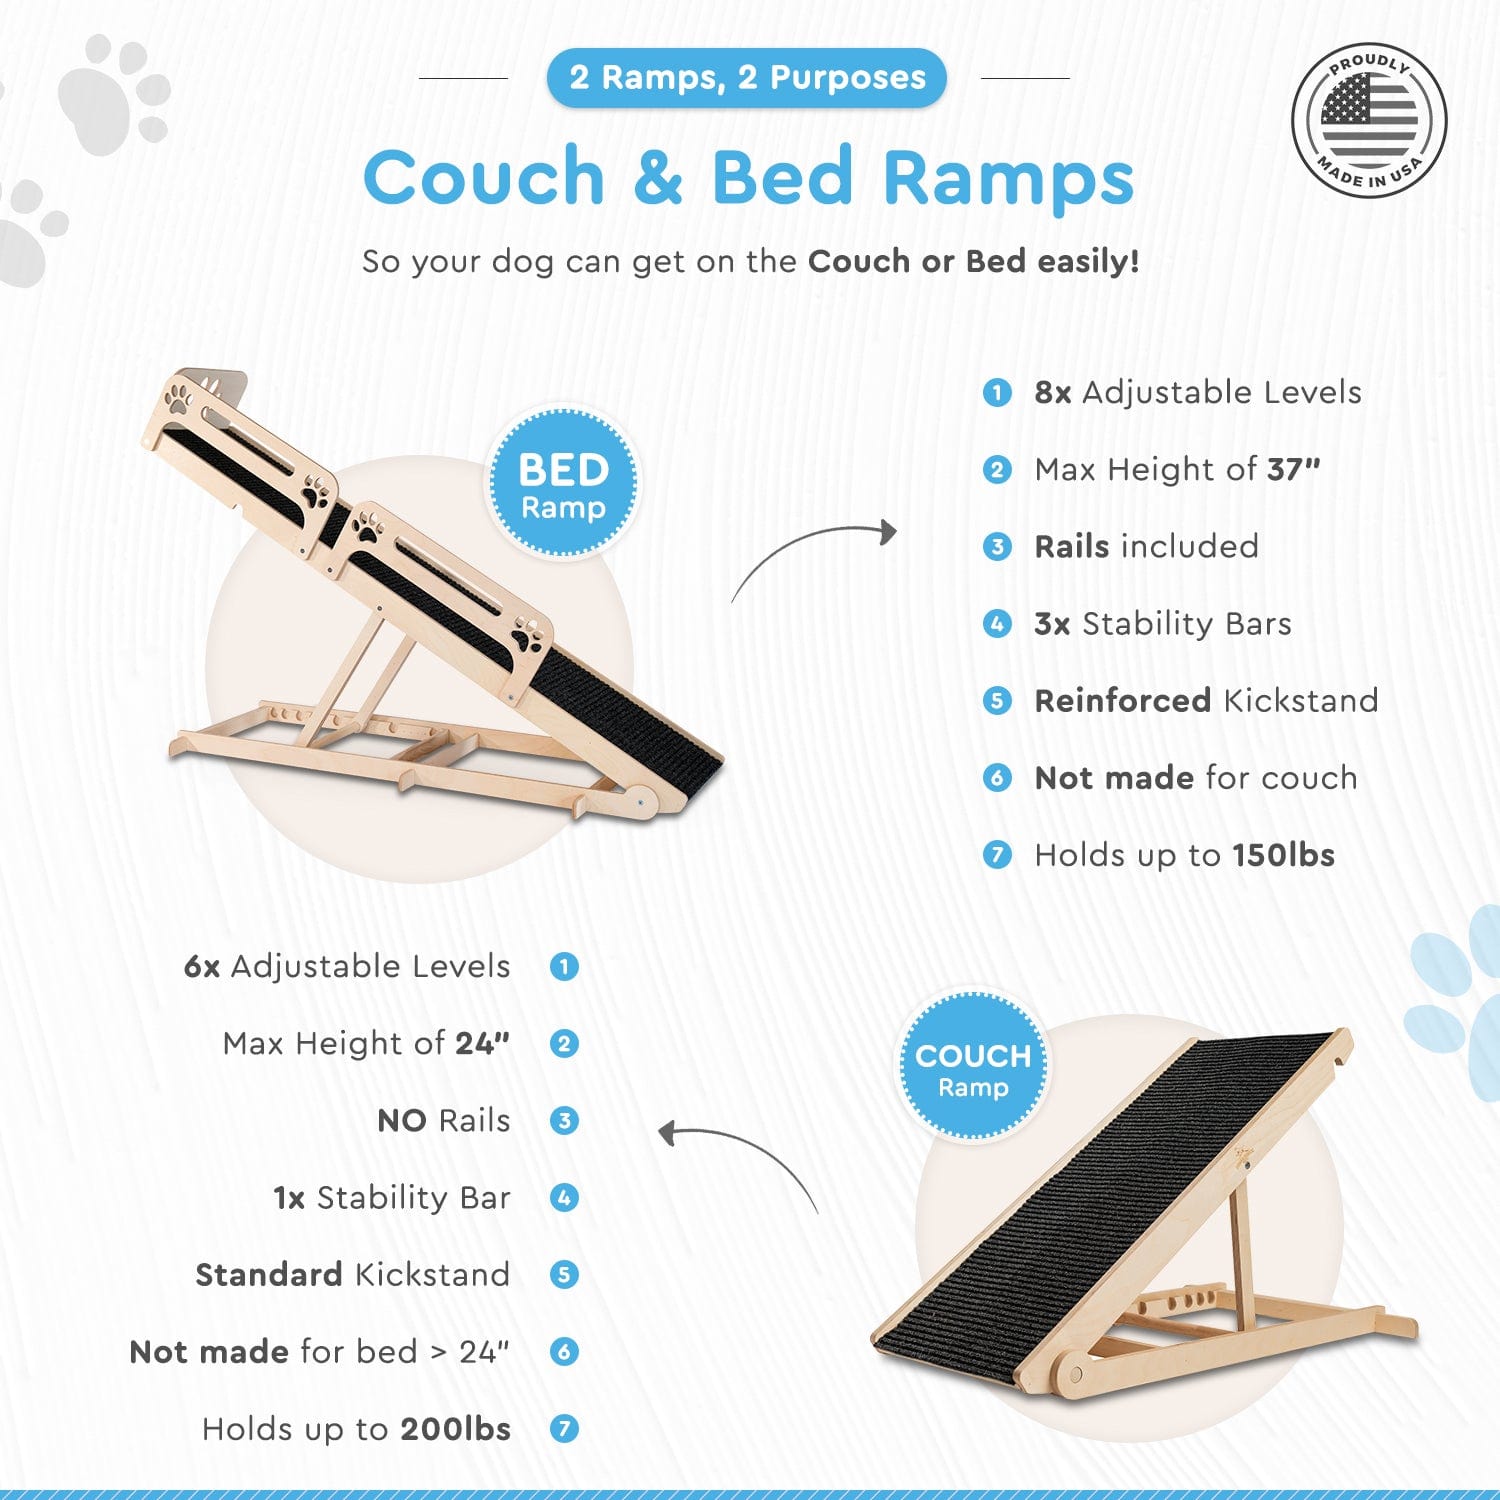 USA Made Dog Ramp For Bed - Adjustable from 14" to 37" Inches - Holds 150LBS -  For Small or Large Dogs